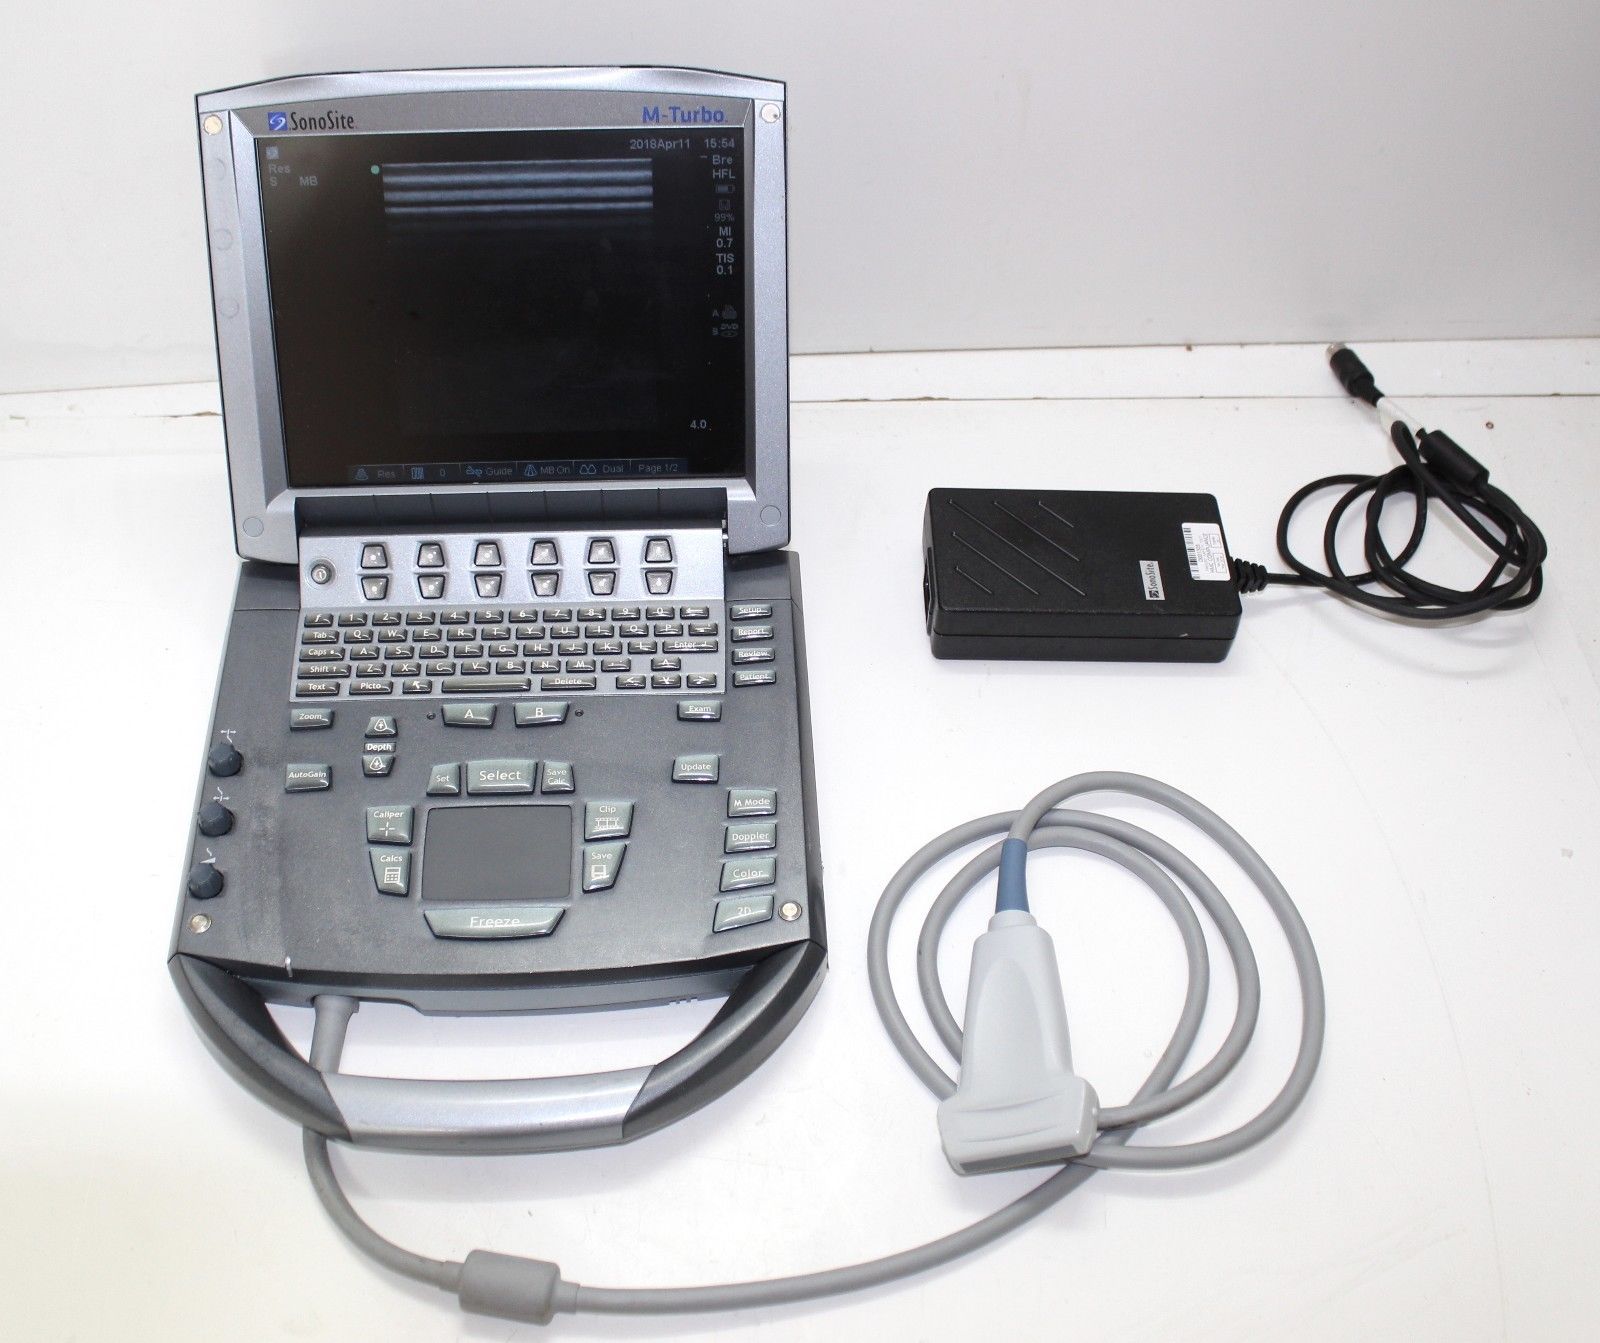 Sonosite M-Turbo Ultrasound with HFL38x Linear Probe ( serviced April 2018) DIAGNOSTIC ULTRASOUND MACHINES FOR SALE